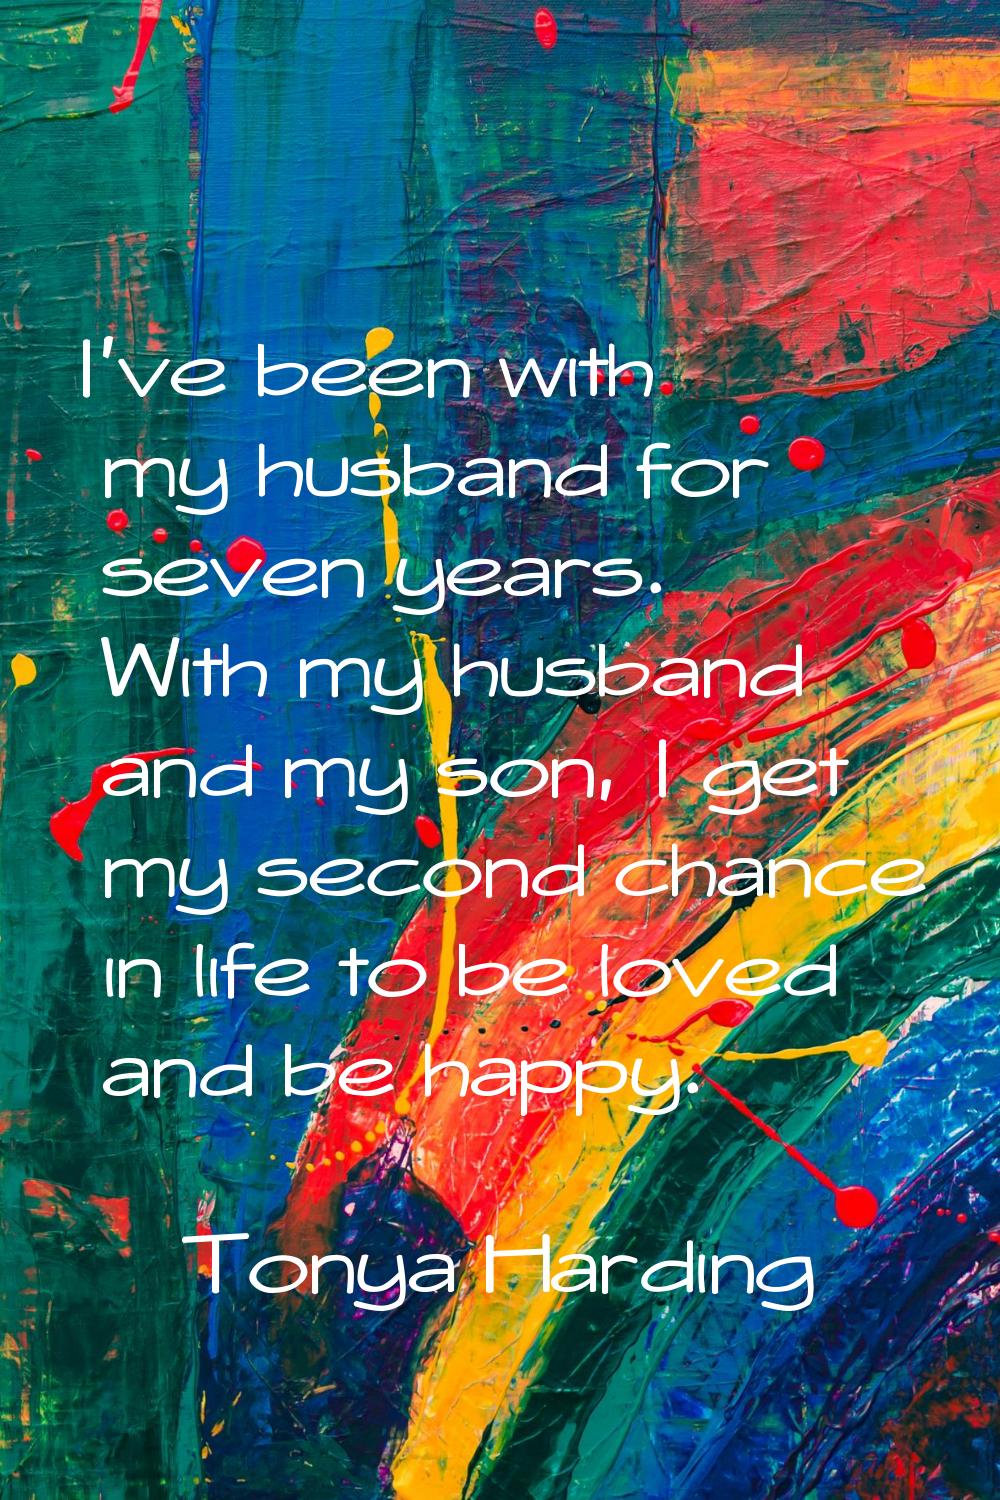 I've been with my husband for seven years. With my husband and my son, I get my second chance in li